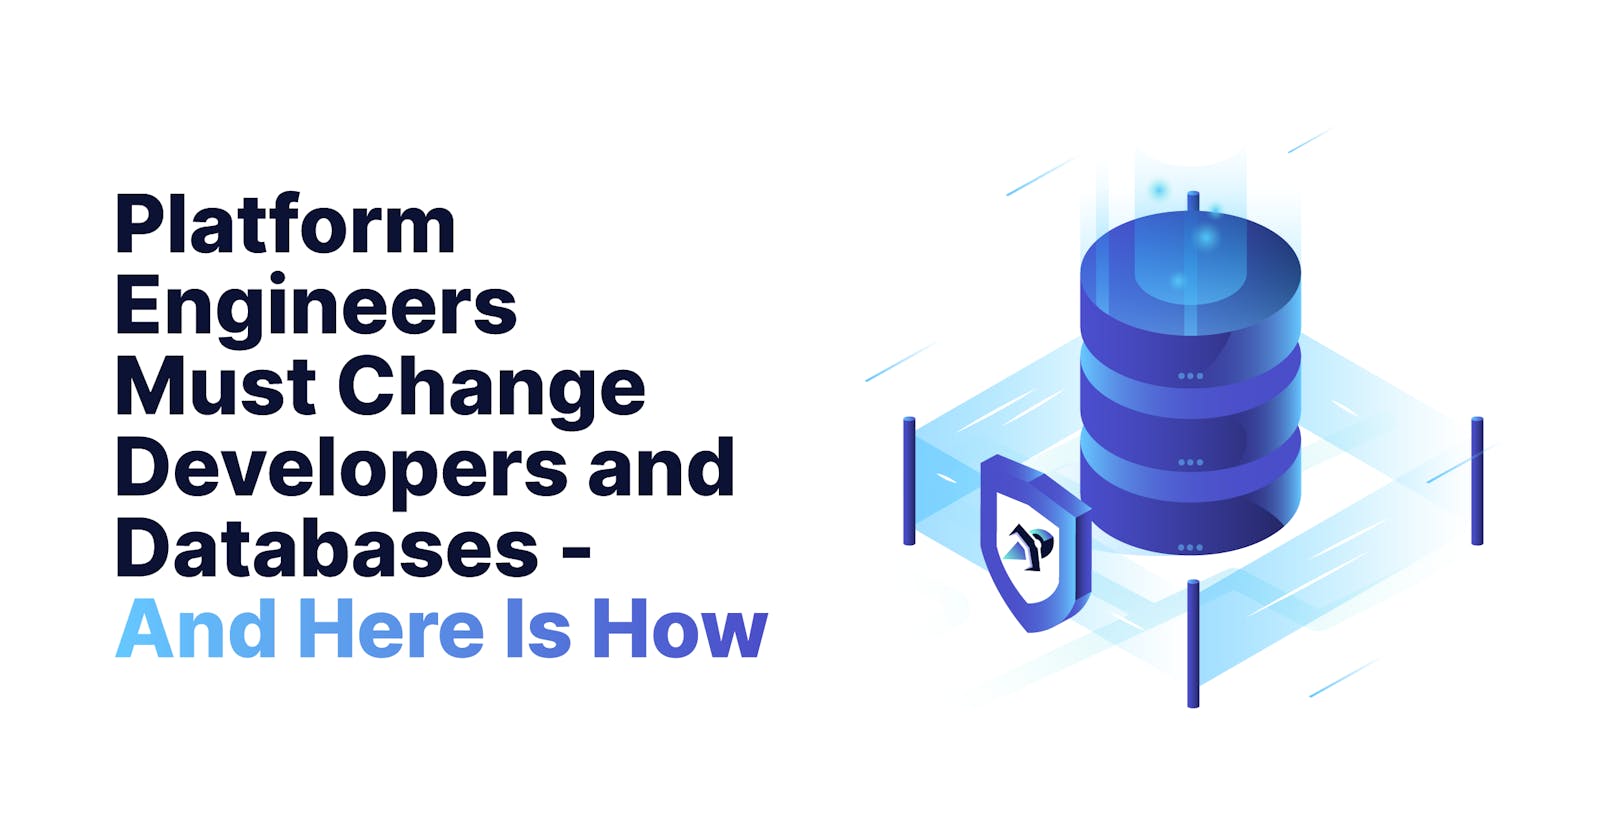 Platform Engineers Must Change Developers and Databases - And Here Is How